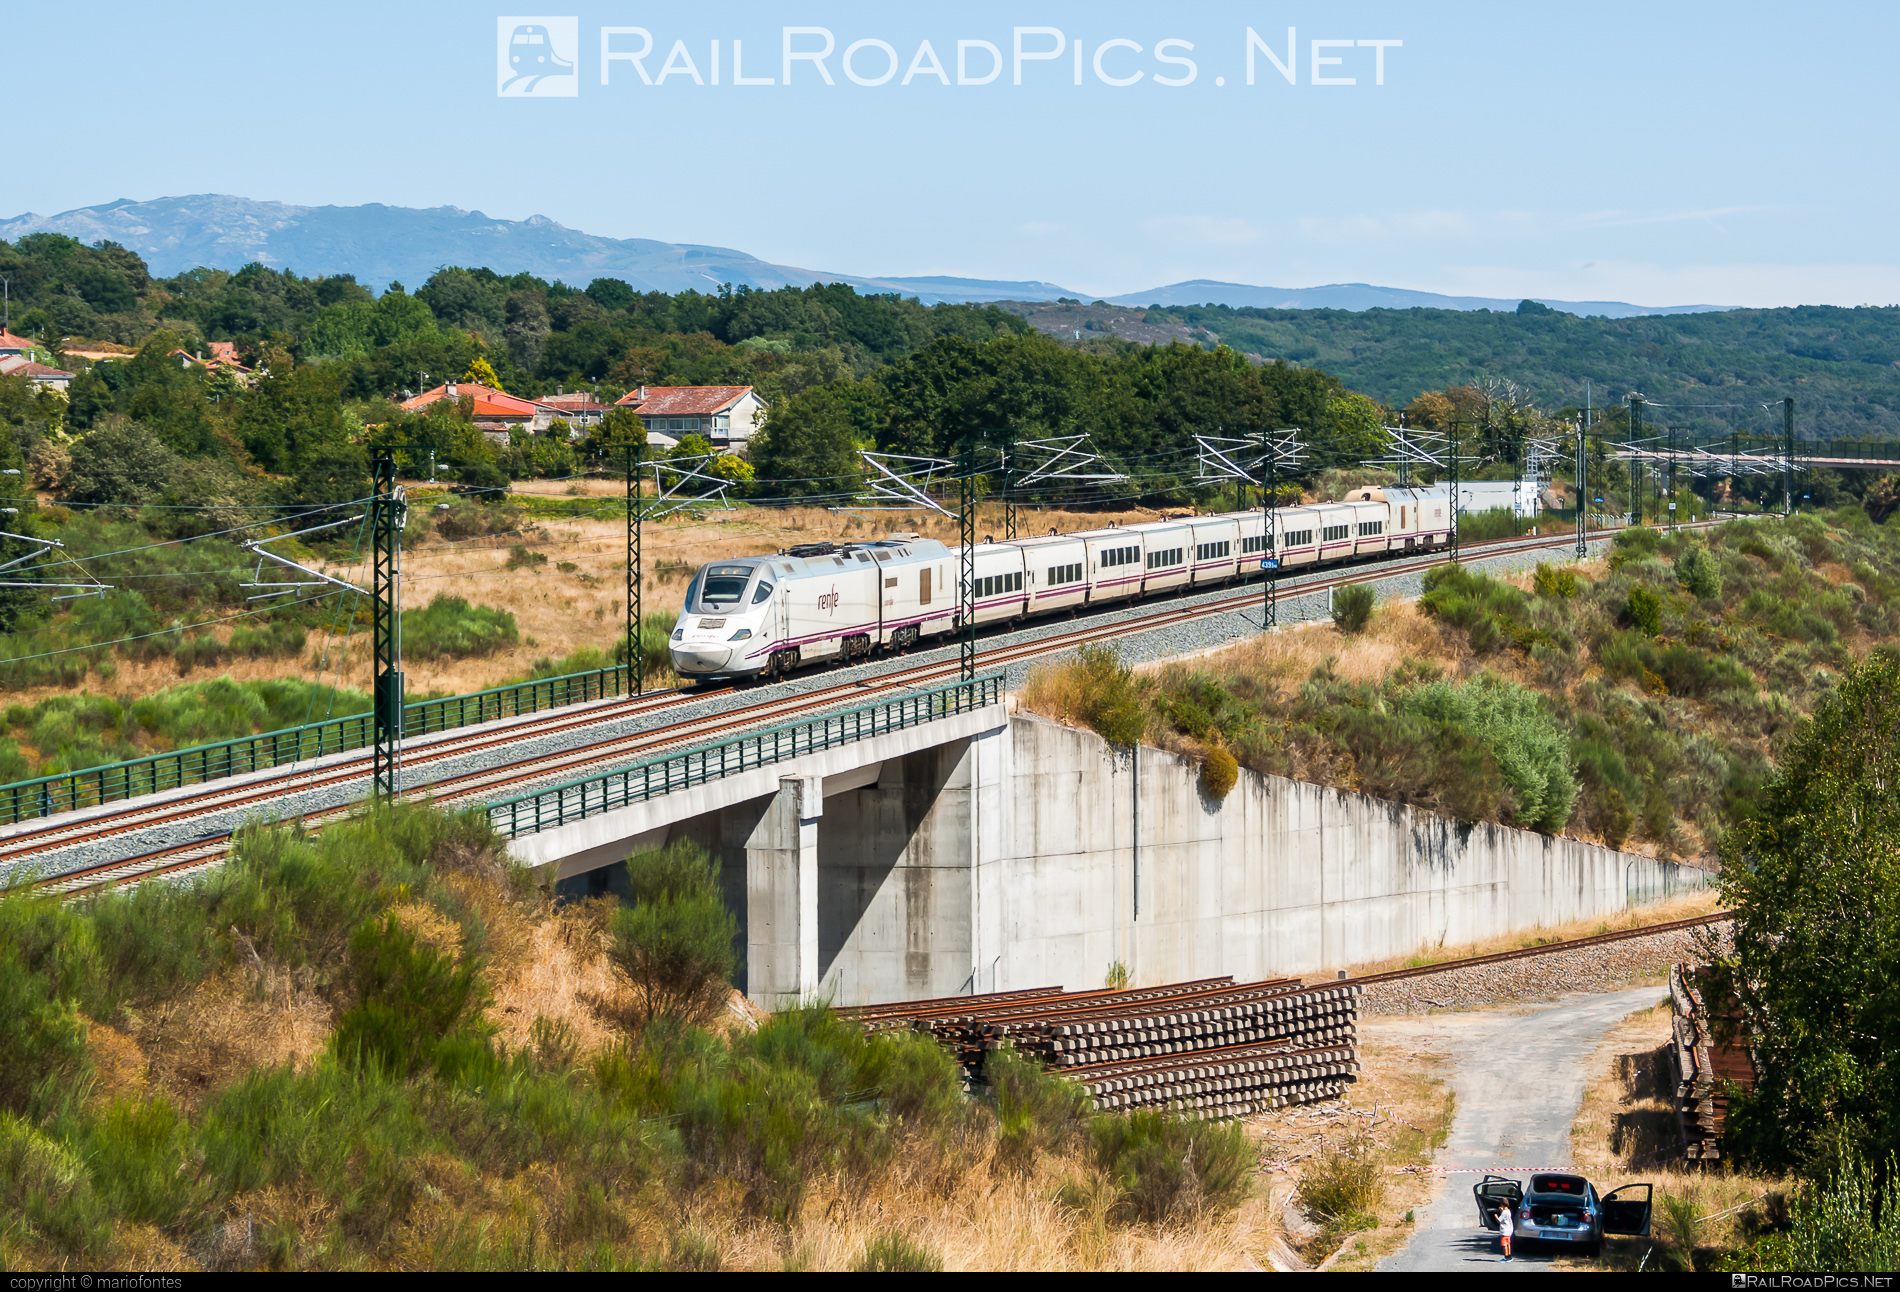 Renfe Class 730 - 075 operated by Renfe Viajeros, S.A. #bridge #renfe #renfeClass730 #renfeViajeros #renfeViajerosSA